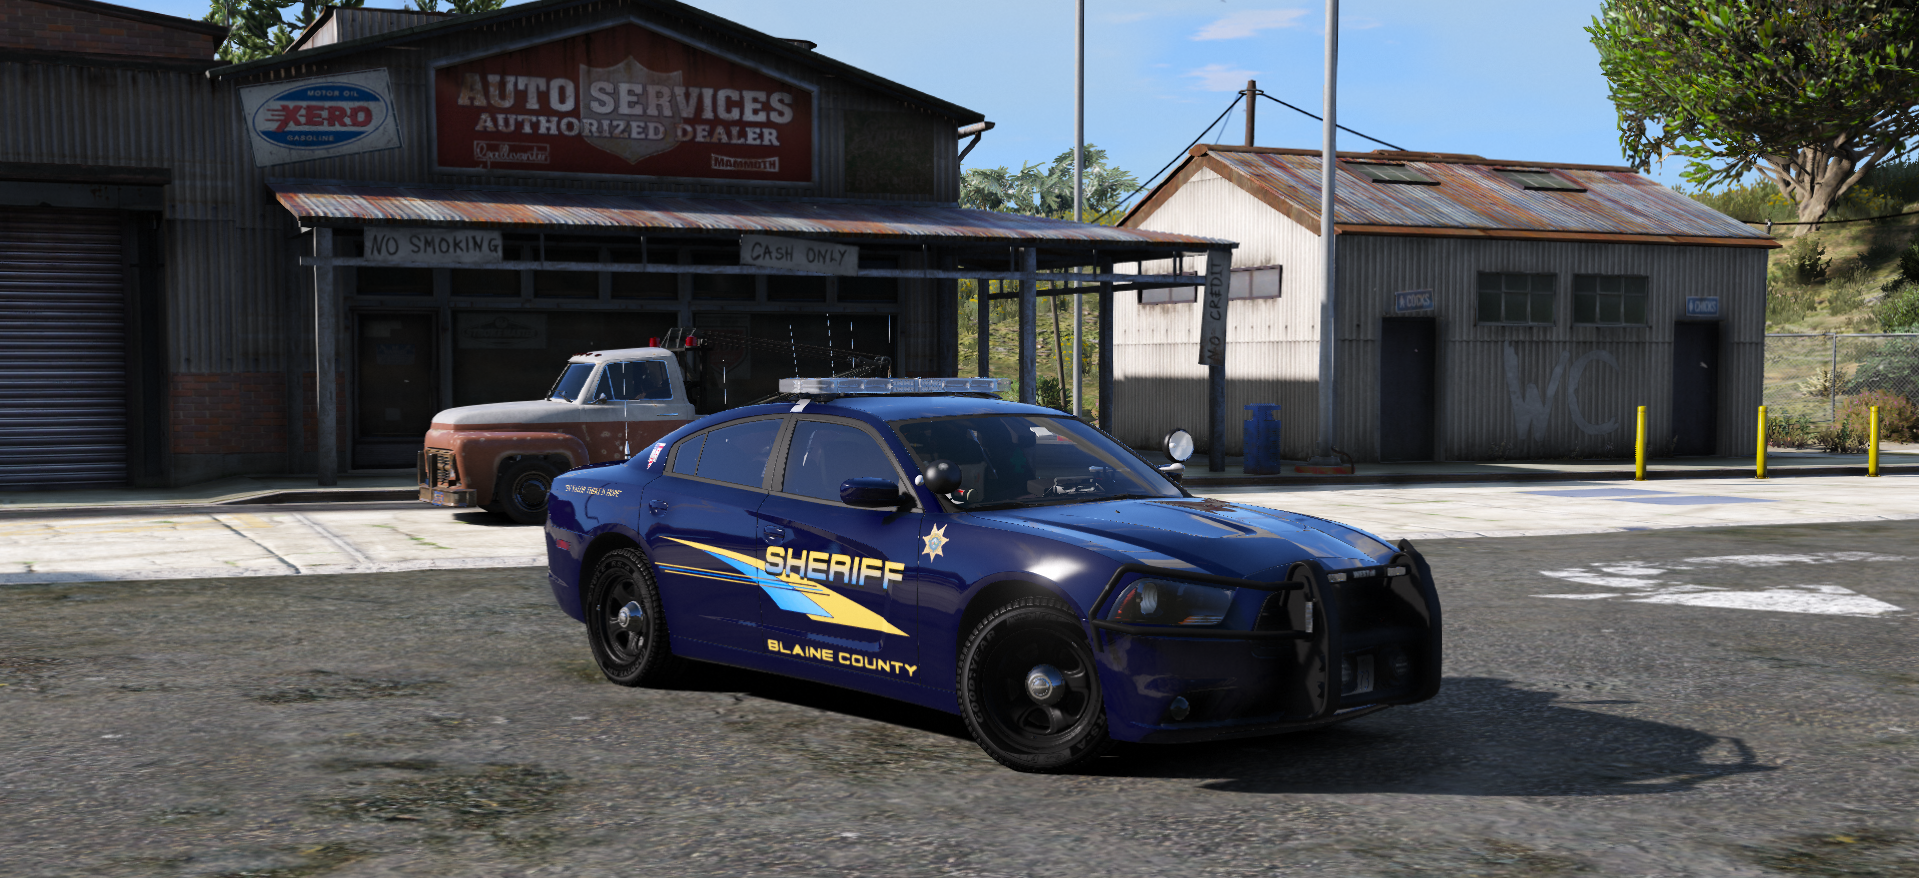 '14 Dodge Charger BCSo